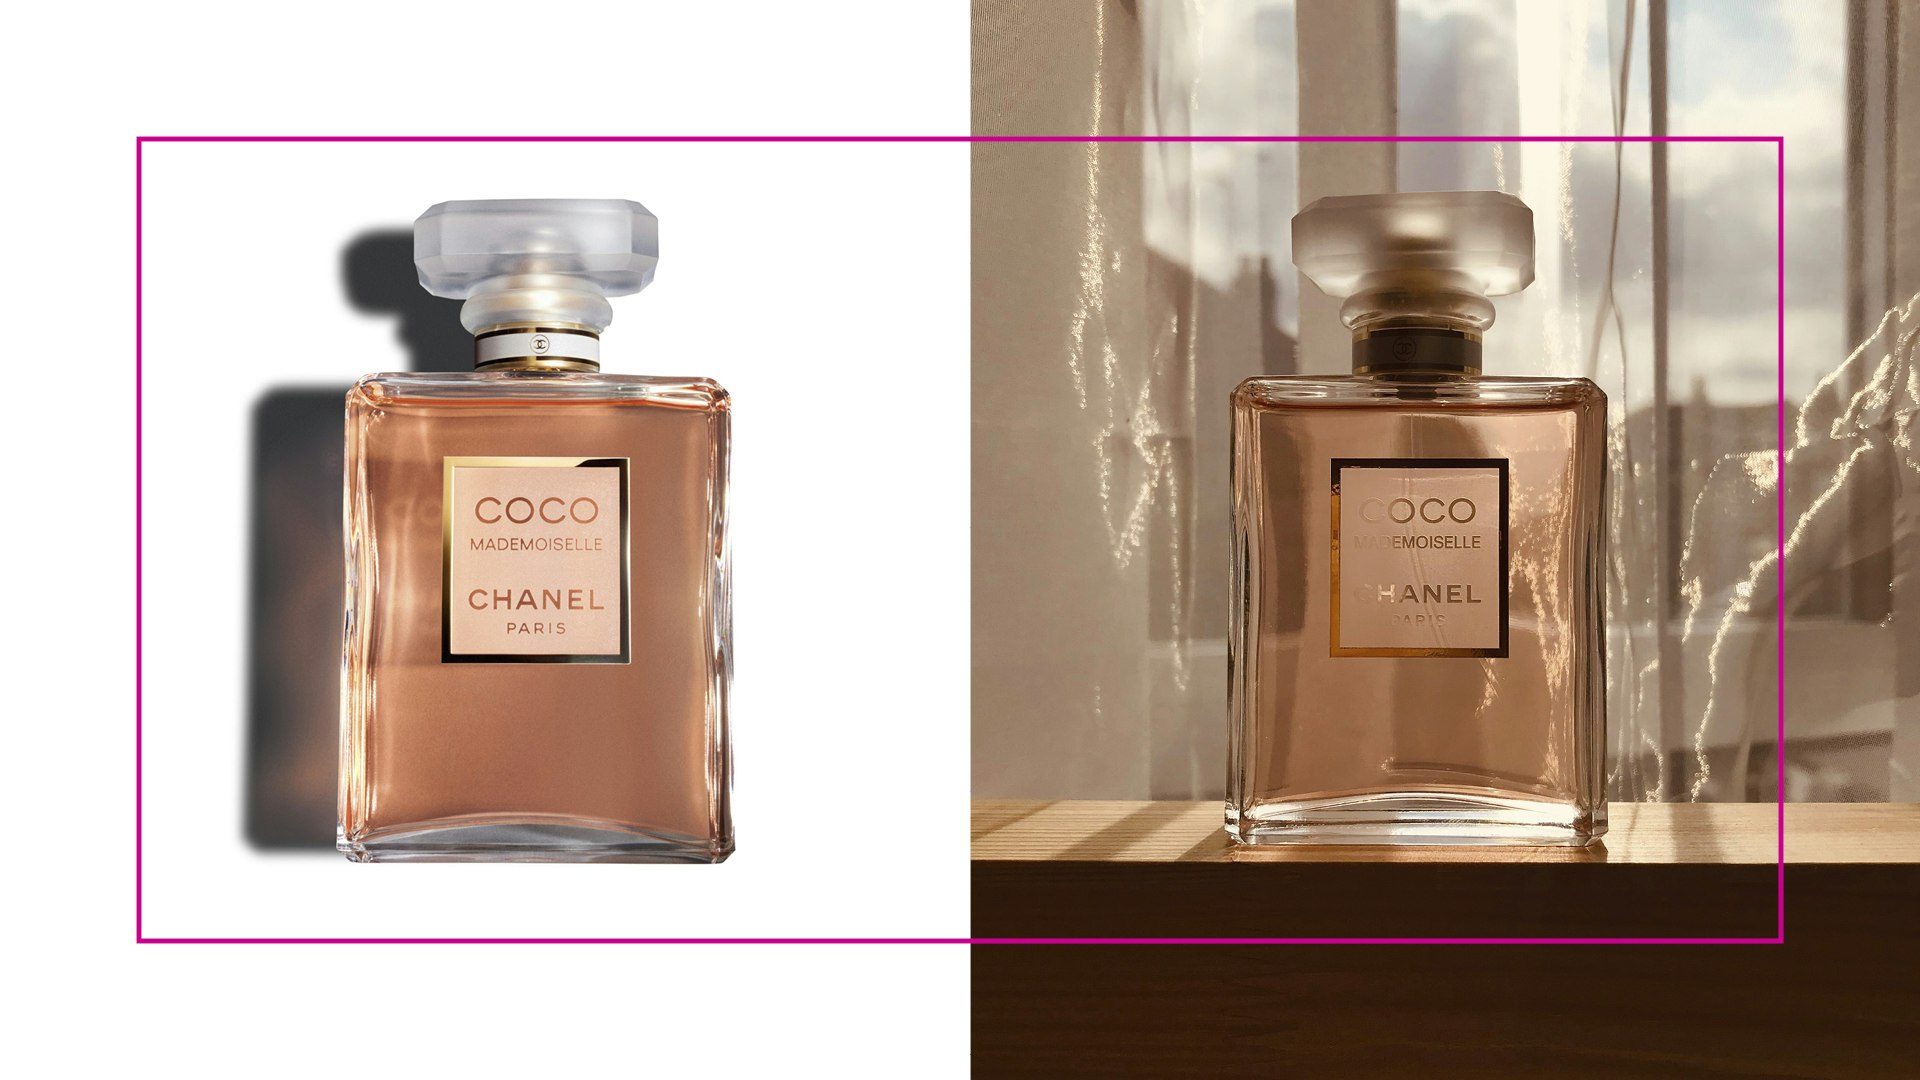 Inspired by Chanel's Coco Mademoiselle - Woman Perfume - Fragrance 50ml/1.7oz - Woody Oakmoss